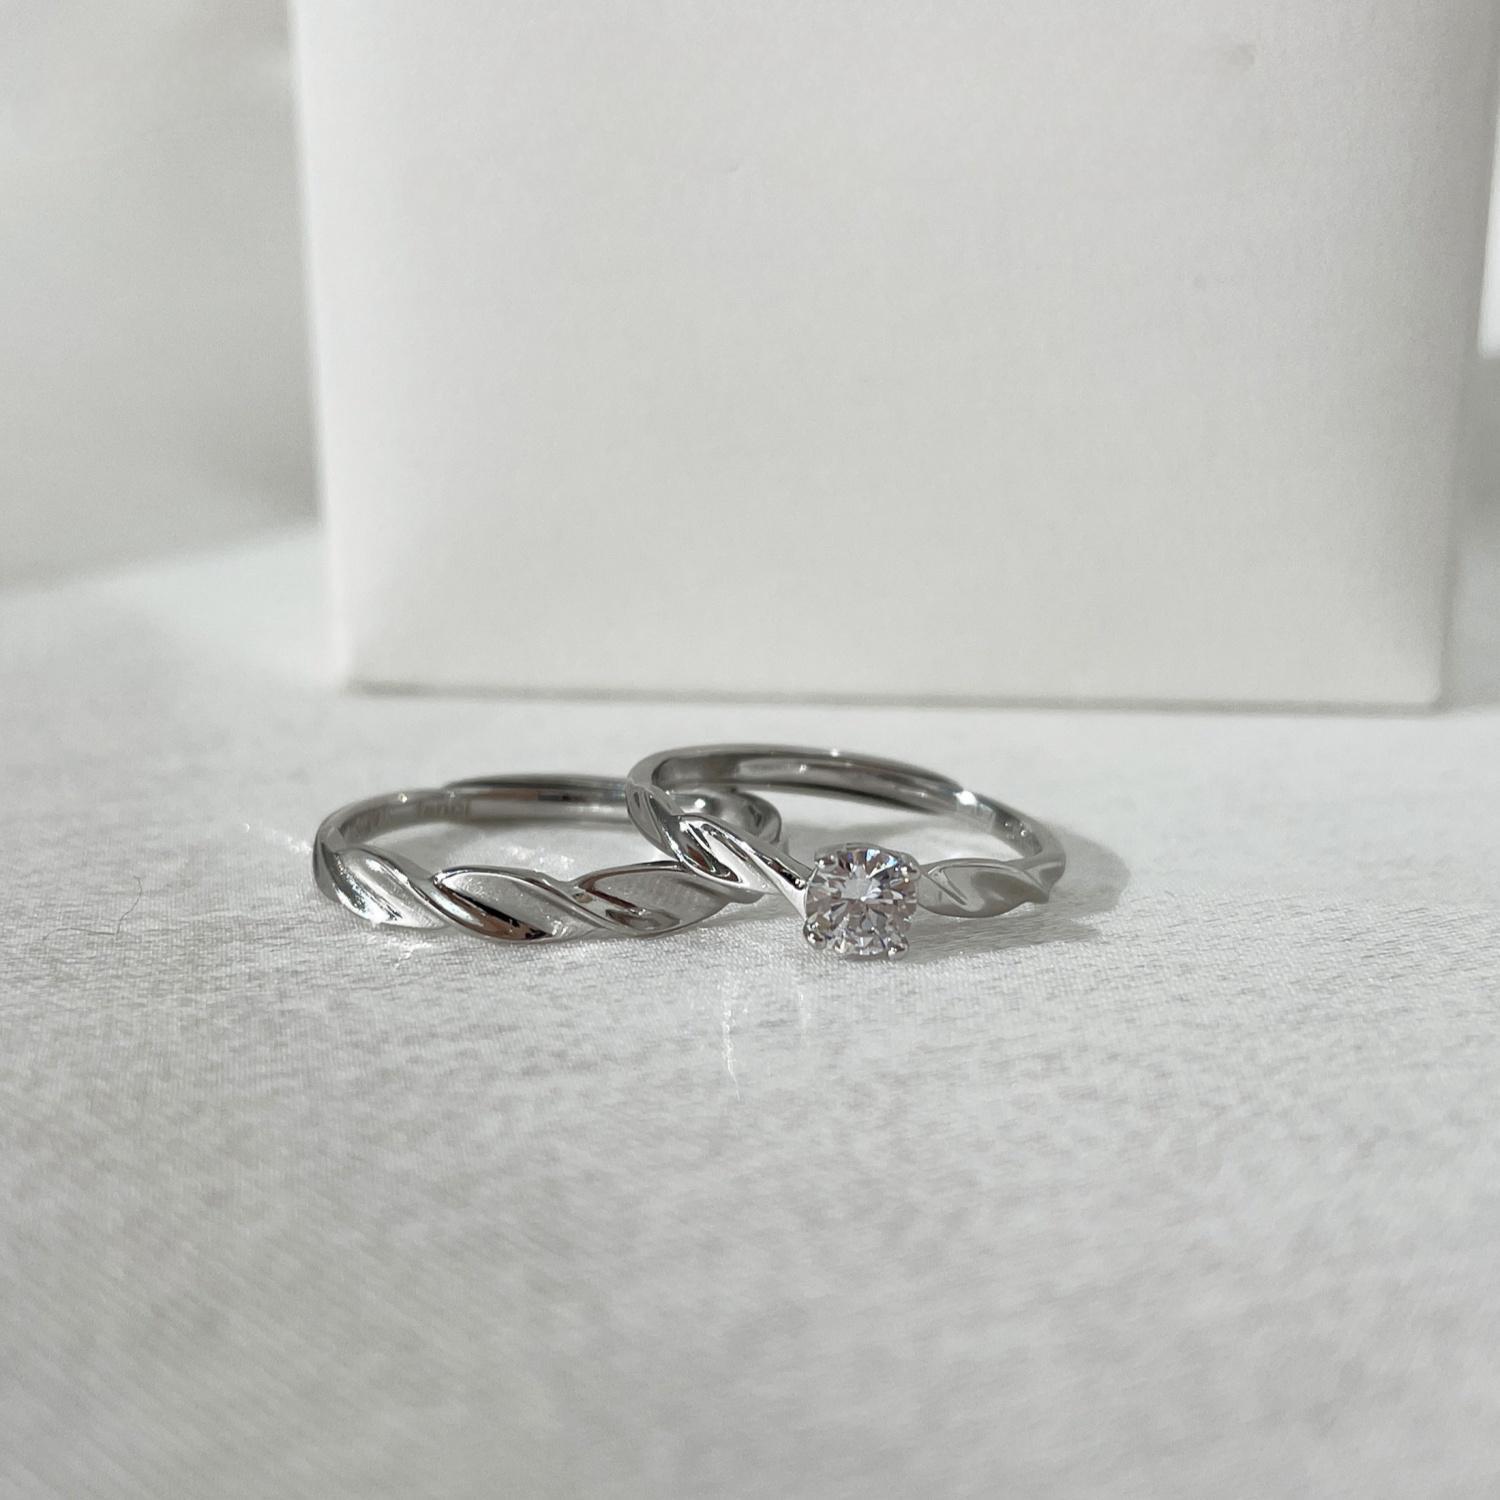 Adjustable Infinity Promise Rings Sets In Sterling Silver - CoupleSets